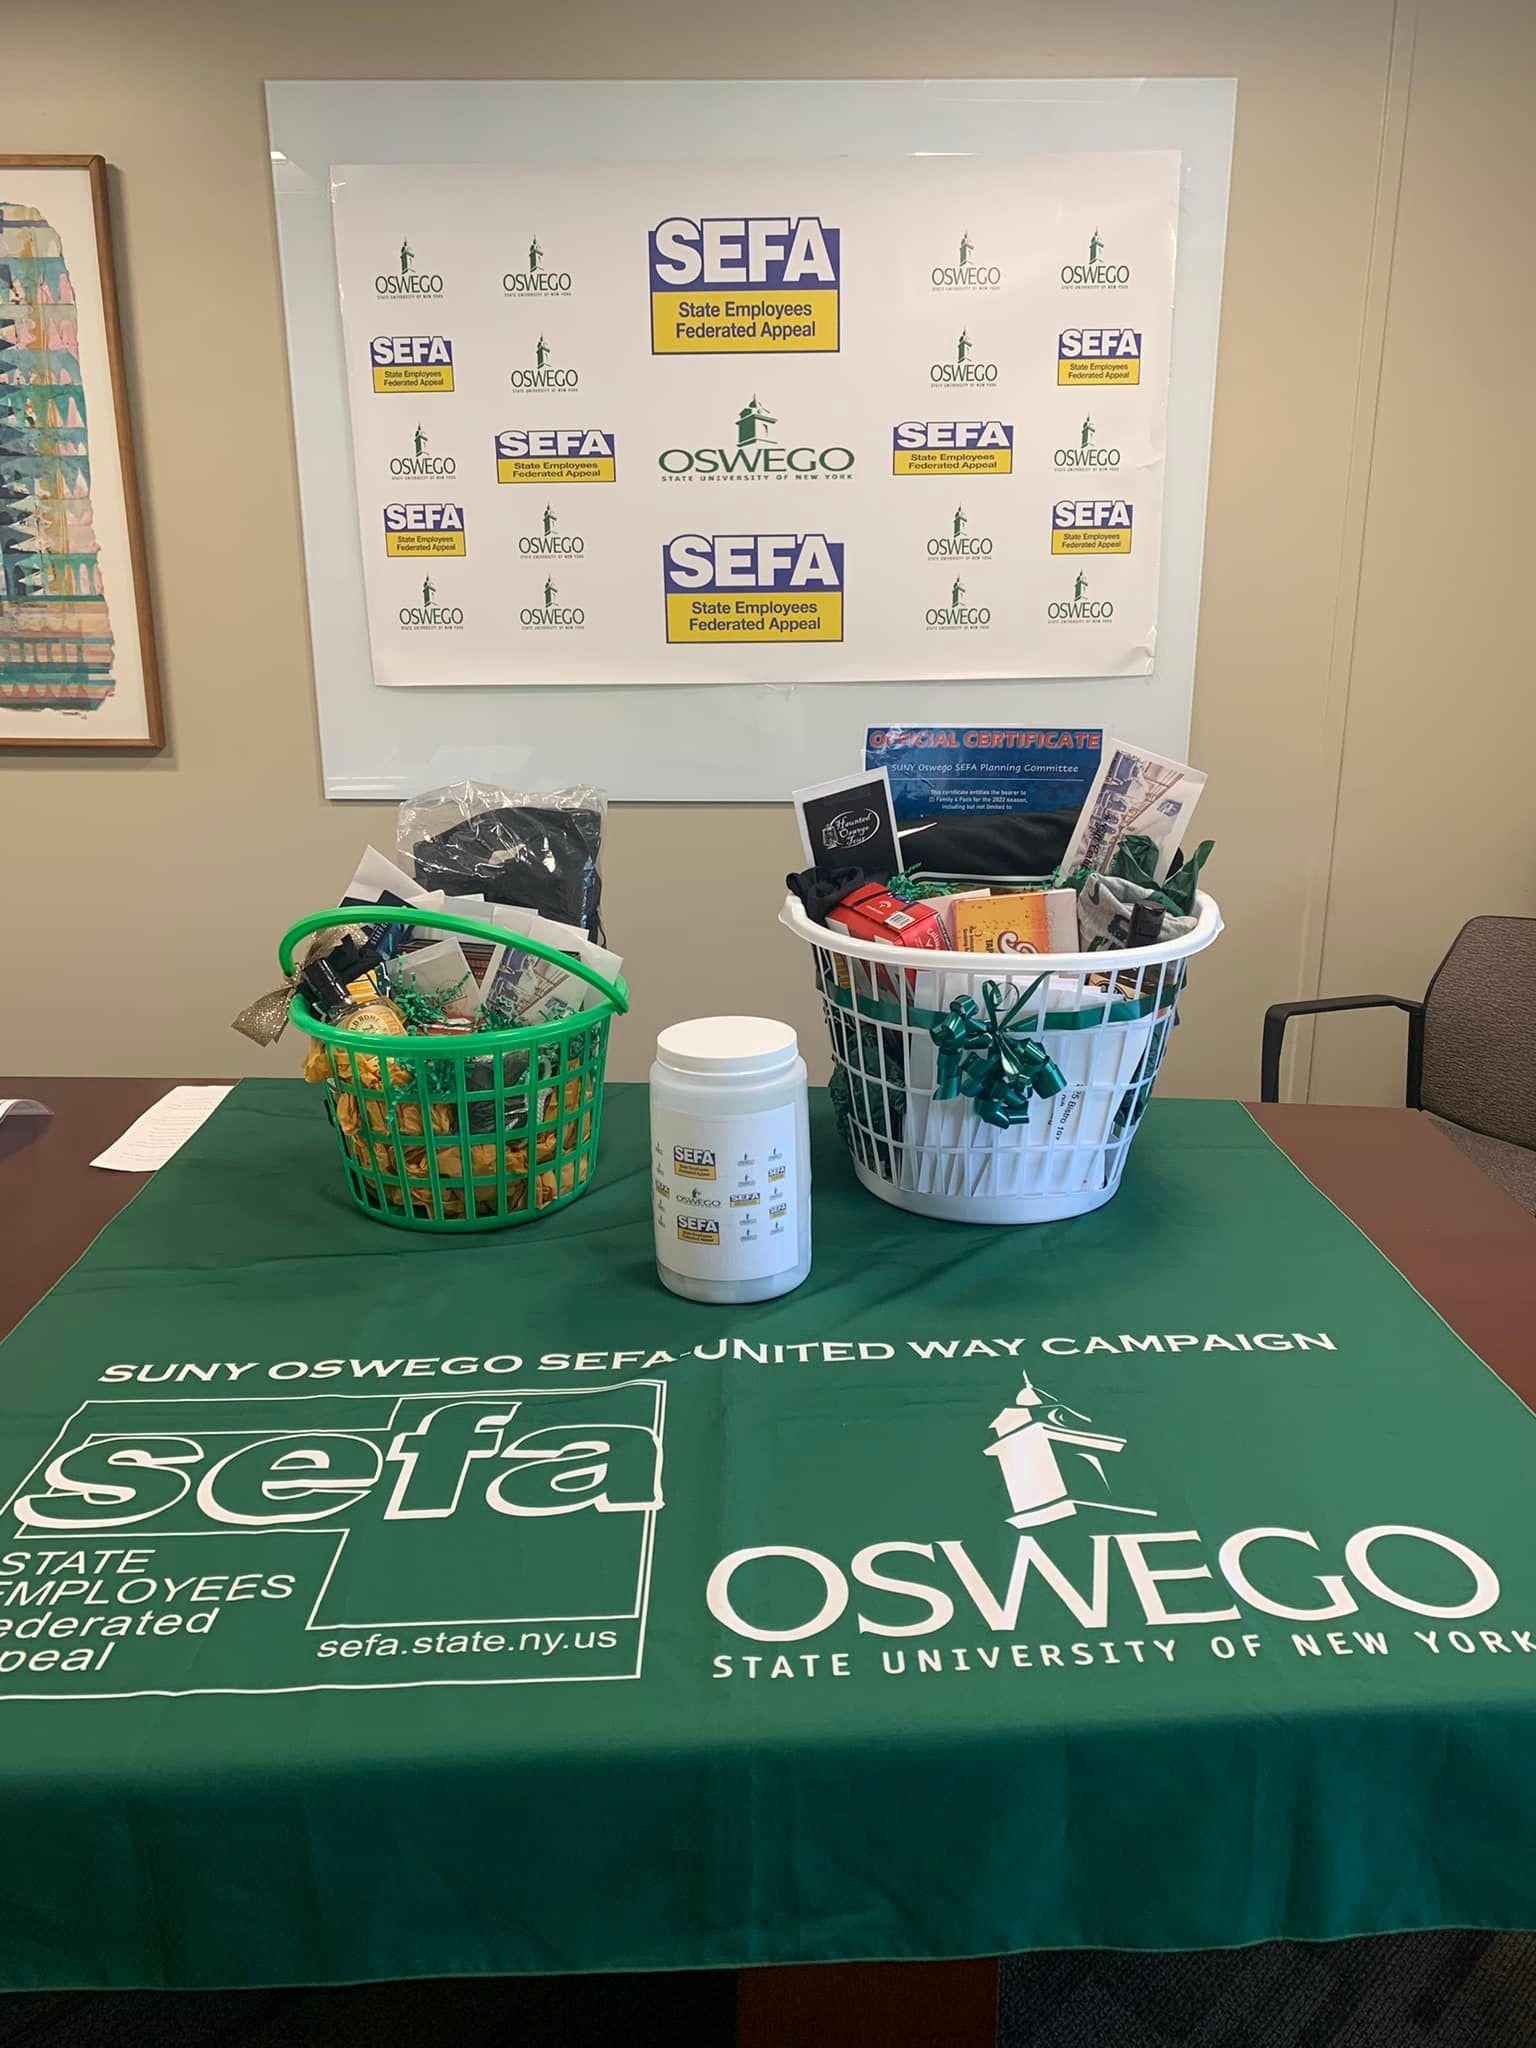 image of two gift baskets on a table with the SEFA logo